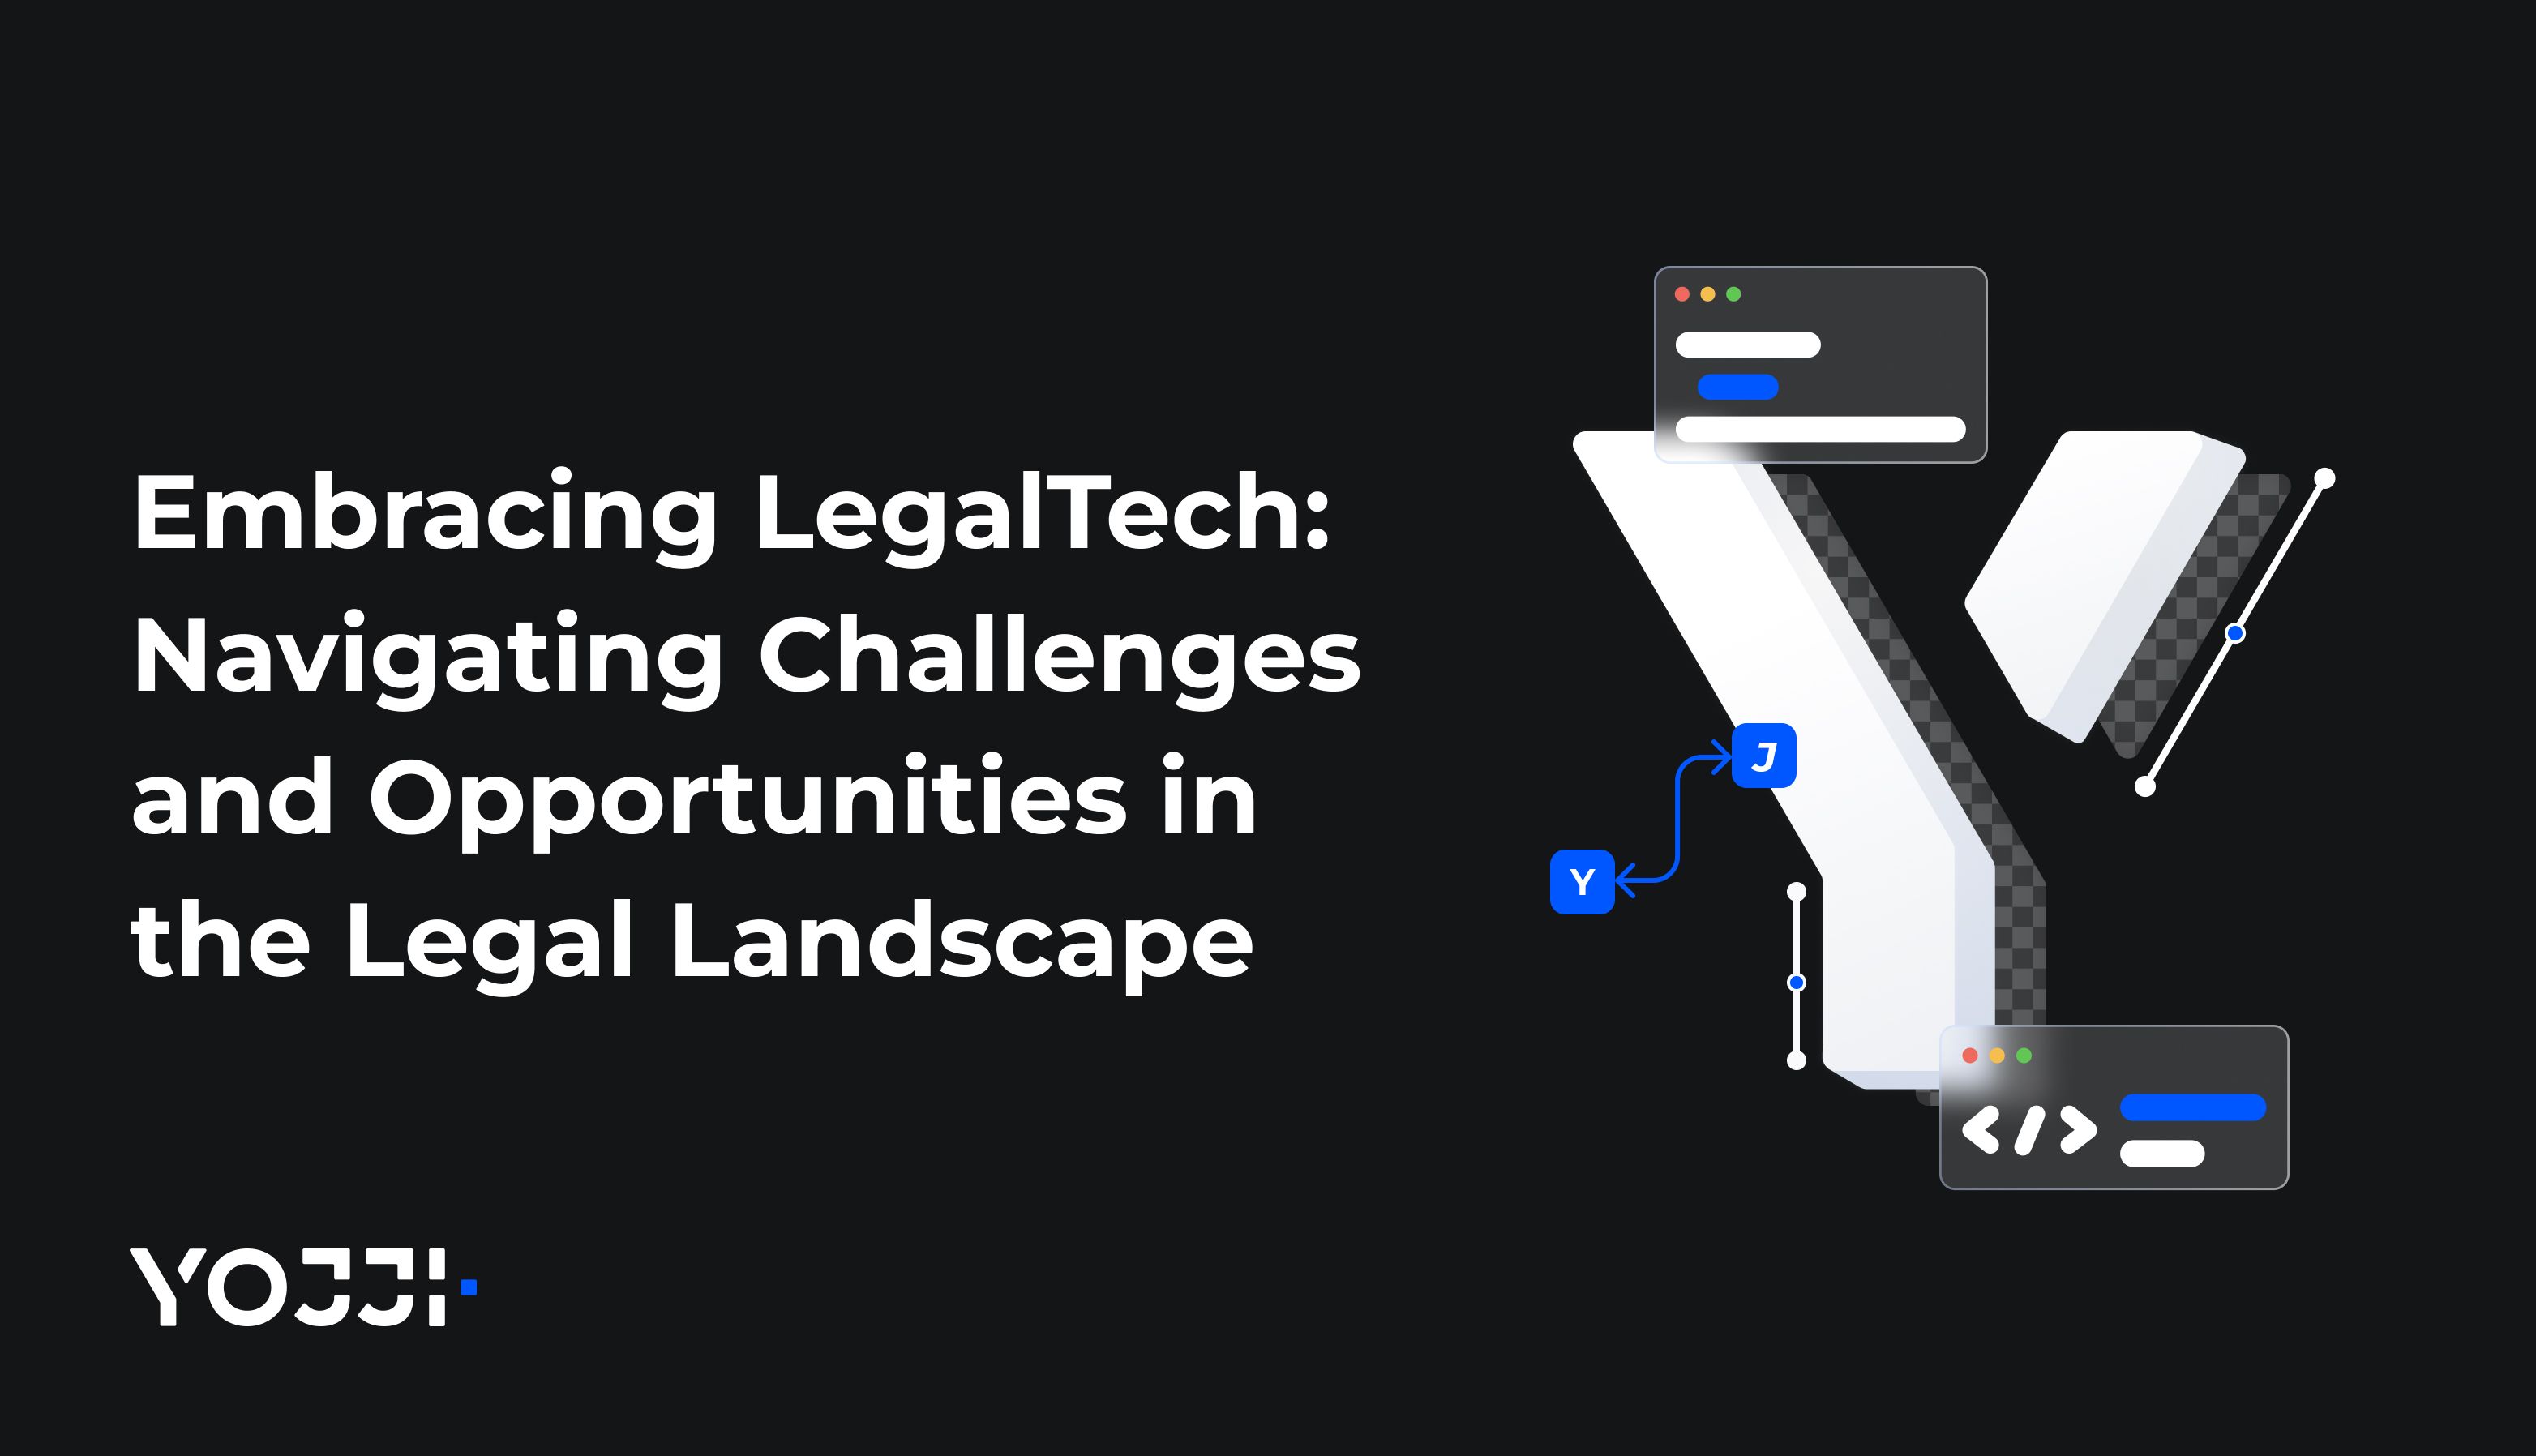 Embracing LegalTech: Navigating Challenges and Opportunities in the Legal Landscape